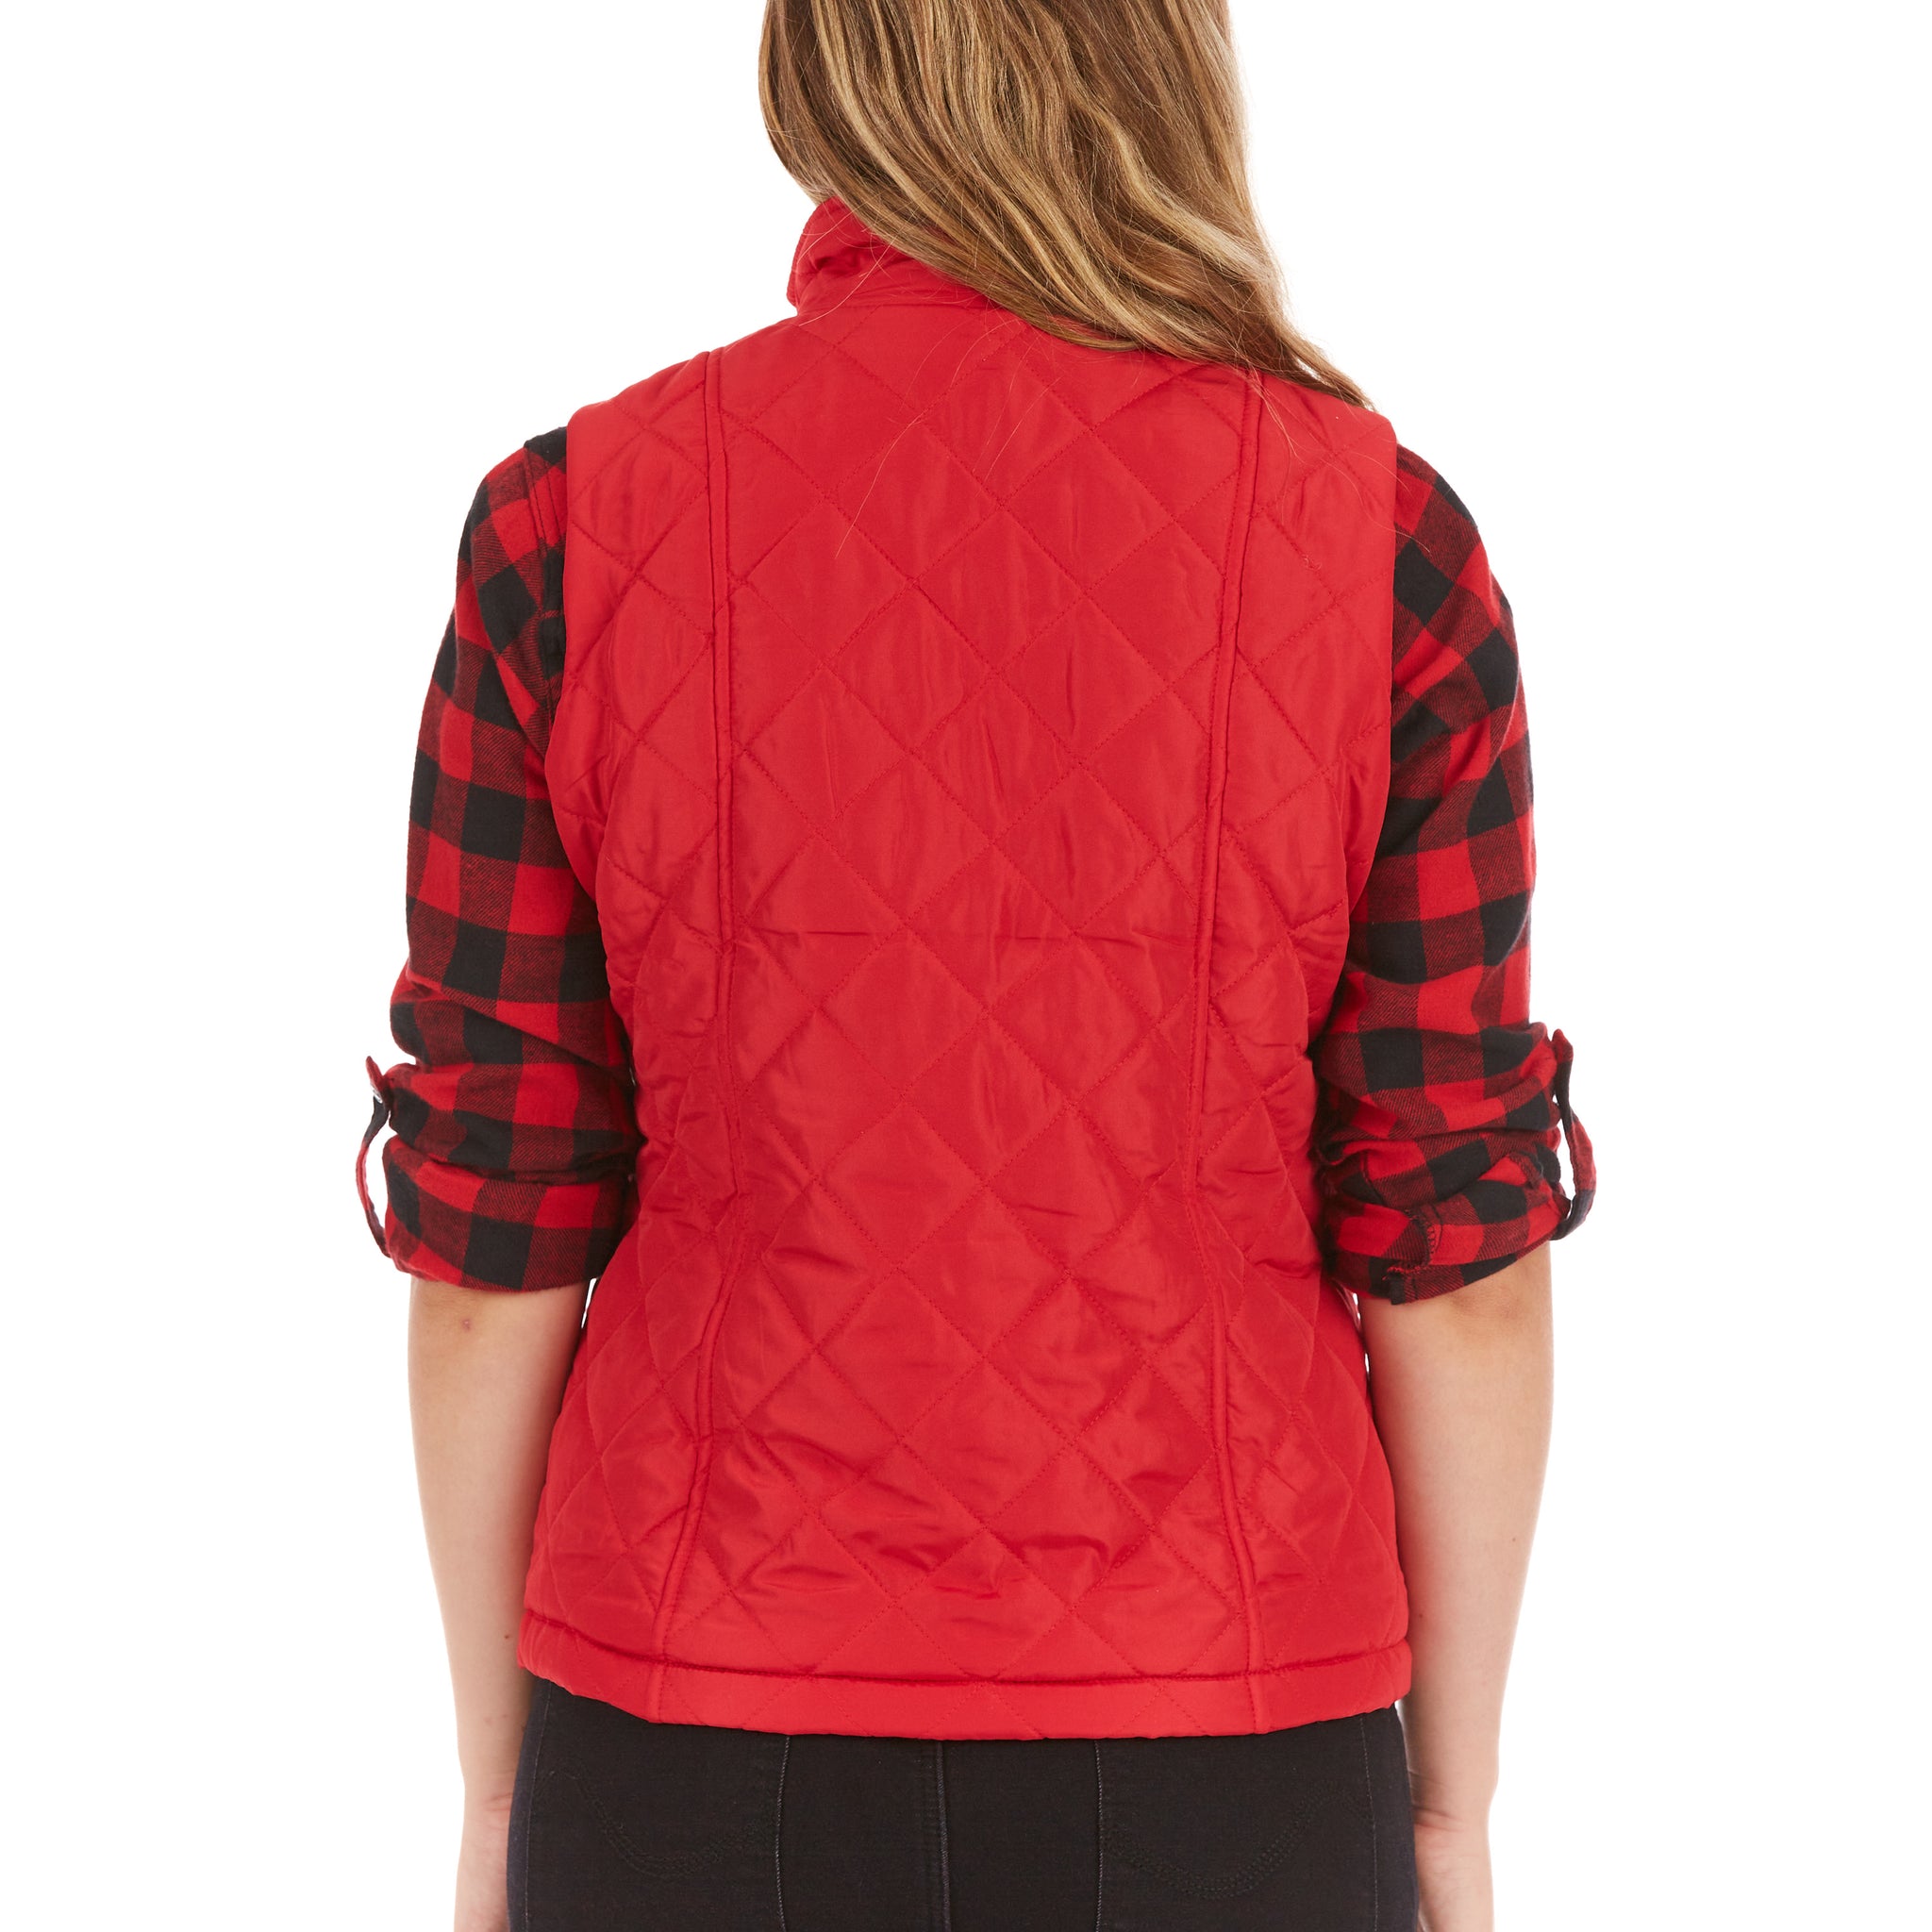 VELOUR-LINED QUILTED VEST